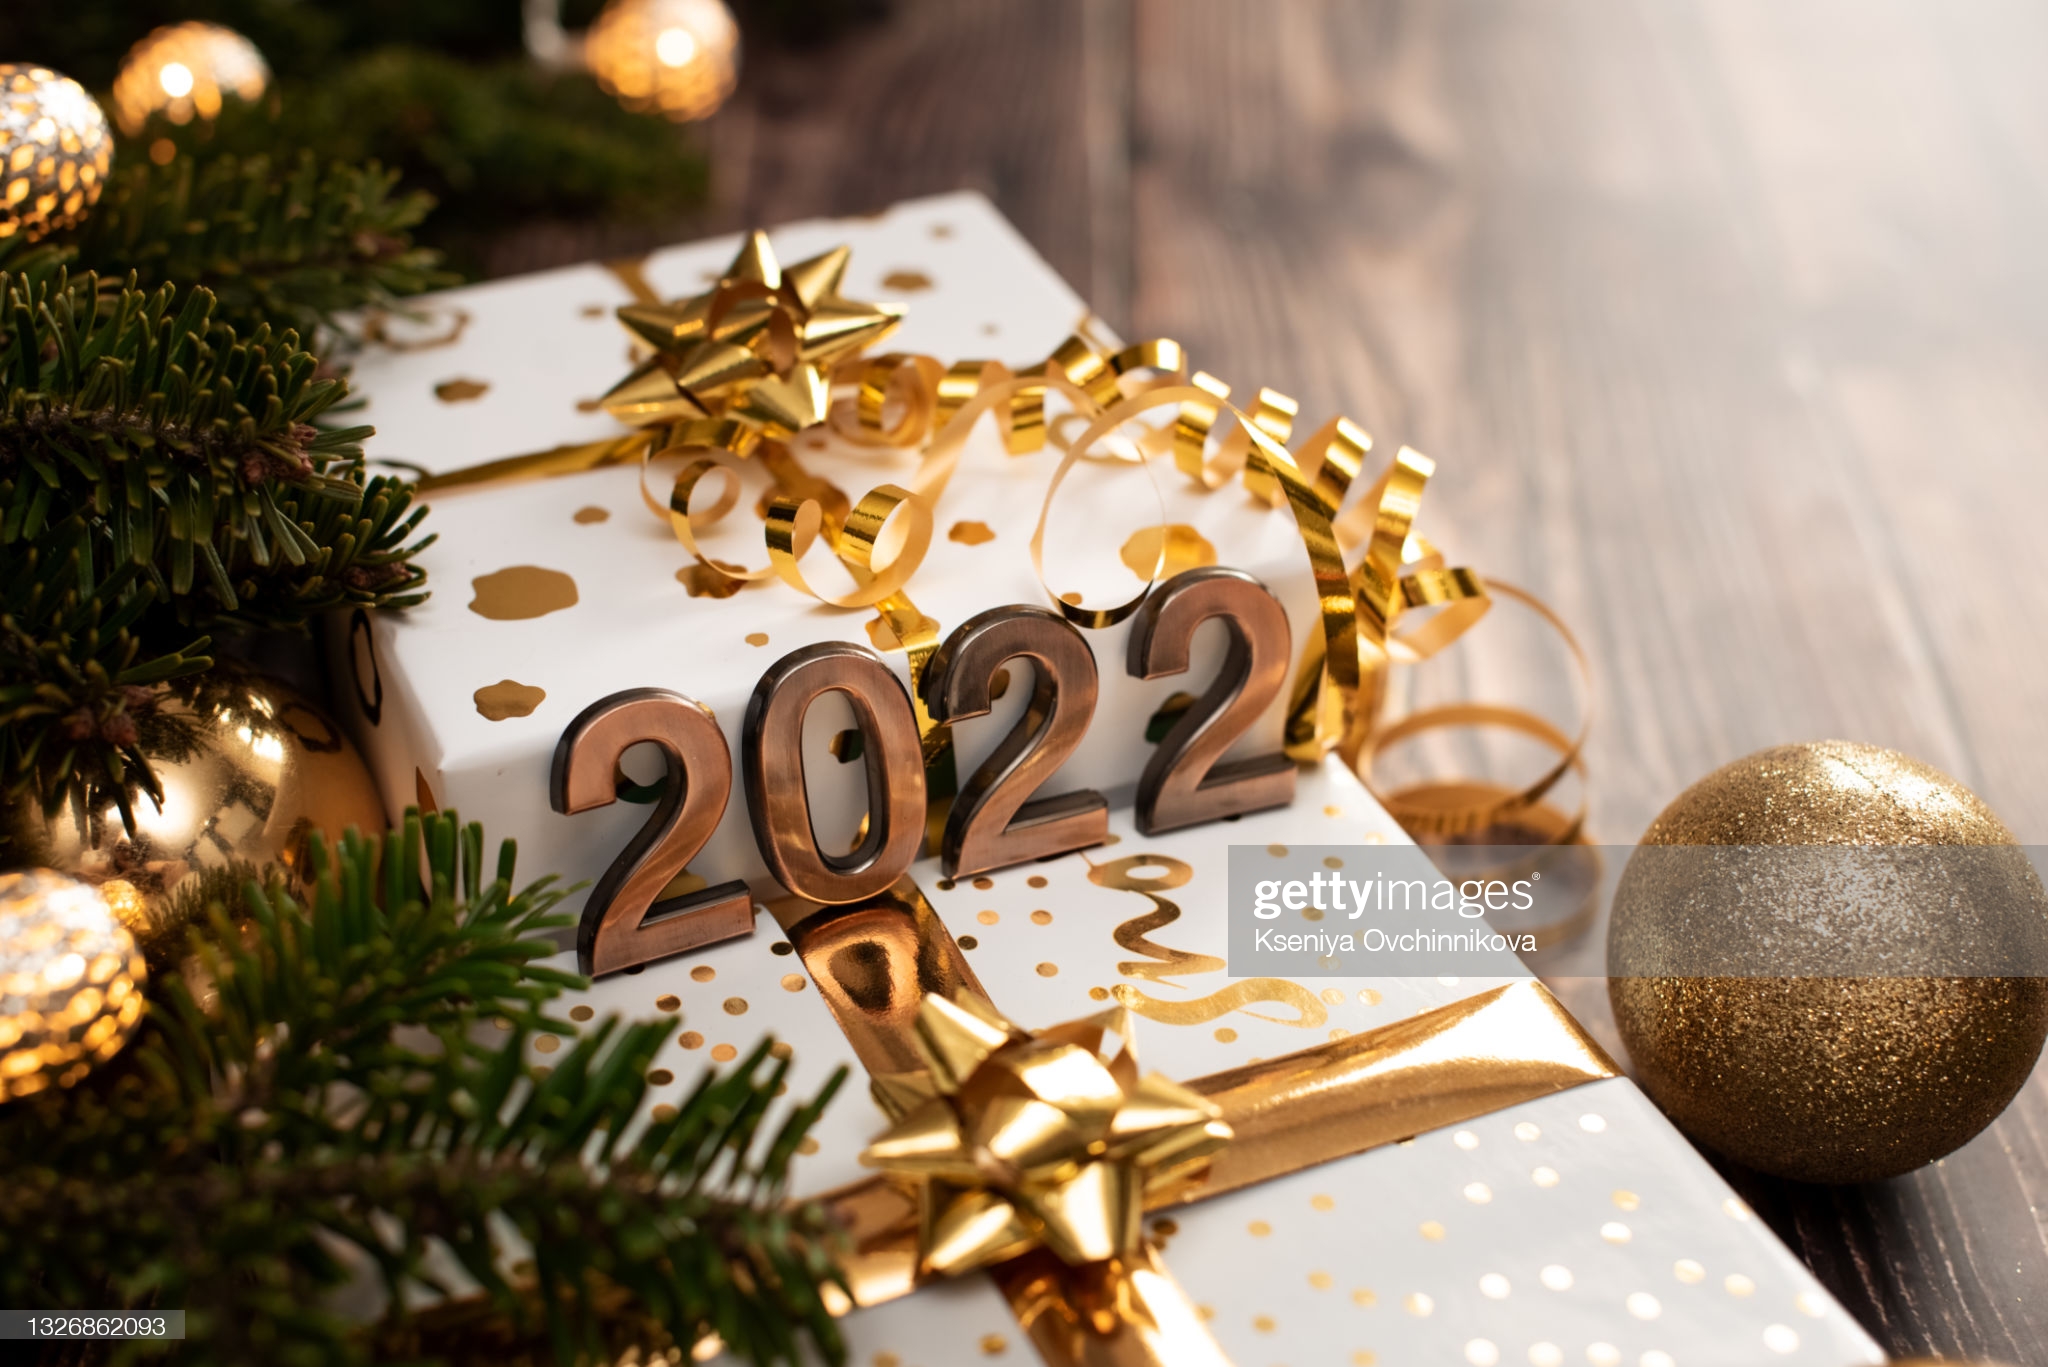 What day will 2022 start on? Is 2022 a new century? What year was 2022 ...